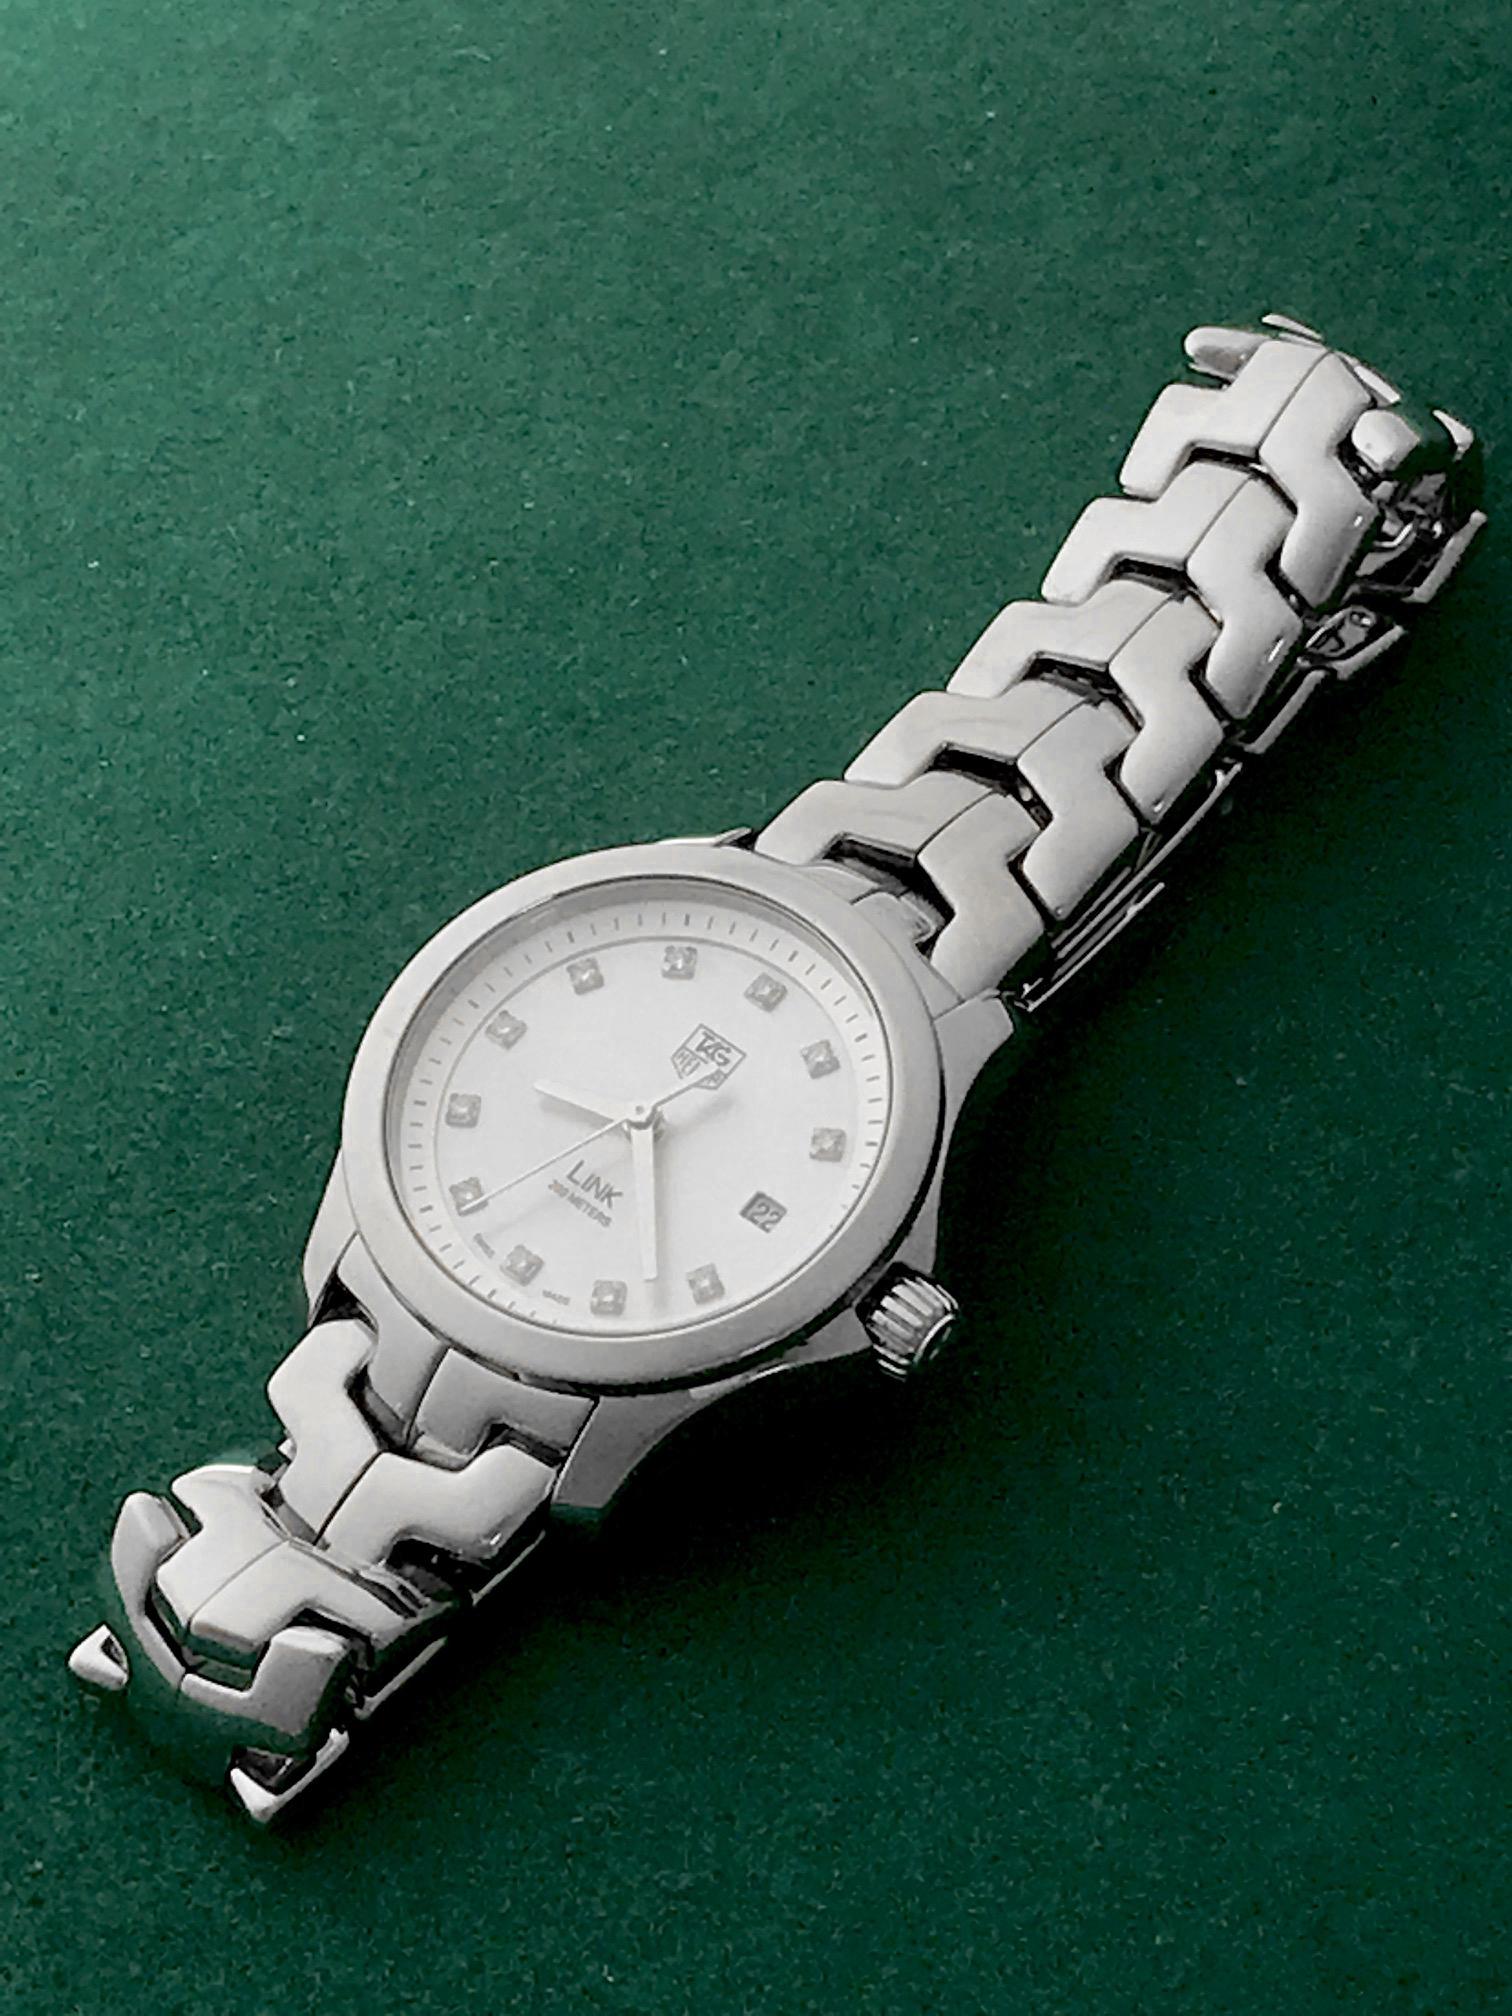 Stunning Preowned Ladies' Tag-Herum Link wristwatch with Stainless Steel case and Mother of Pearl Dial with Diamond Markers. Stainless Steel case (27mm dia.). Water-Resistant to 200 Meters - 660 Feet. Stainless Steel Tag-Heuer bracelet with